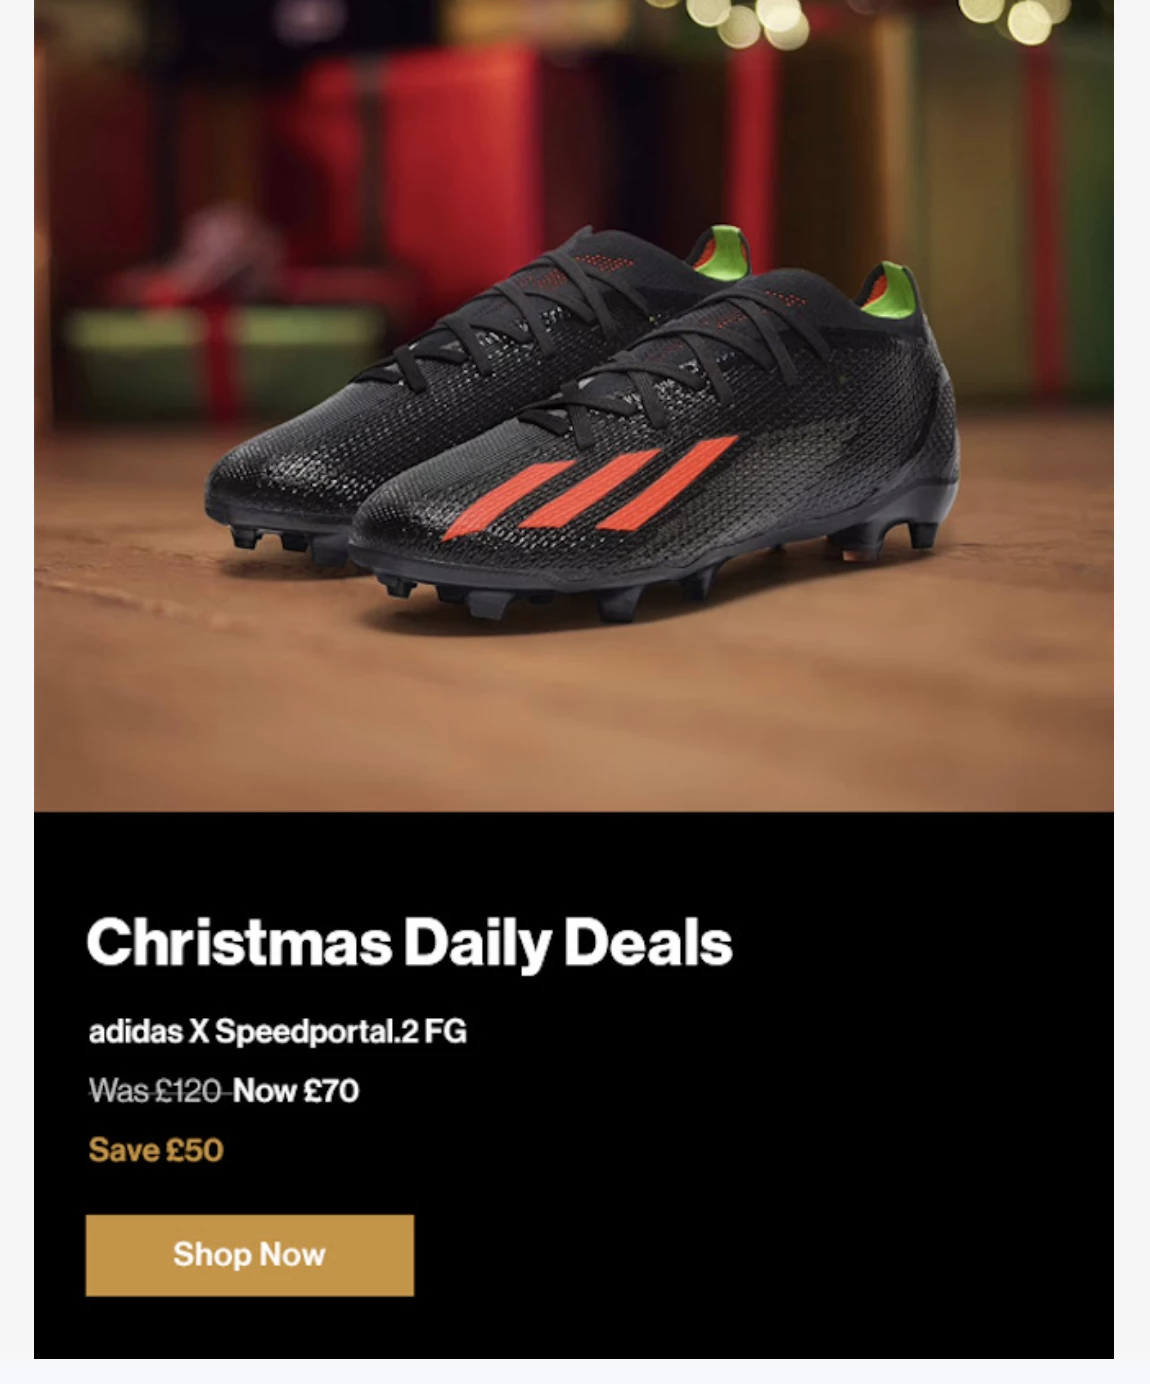 Daily deals email selling soccer shoes